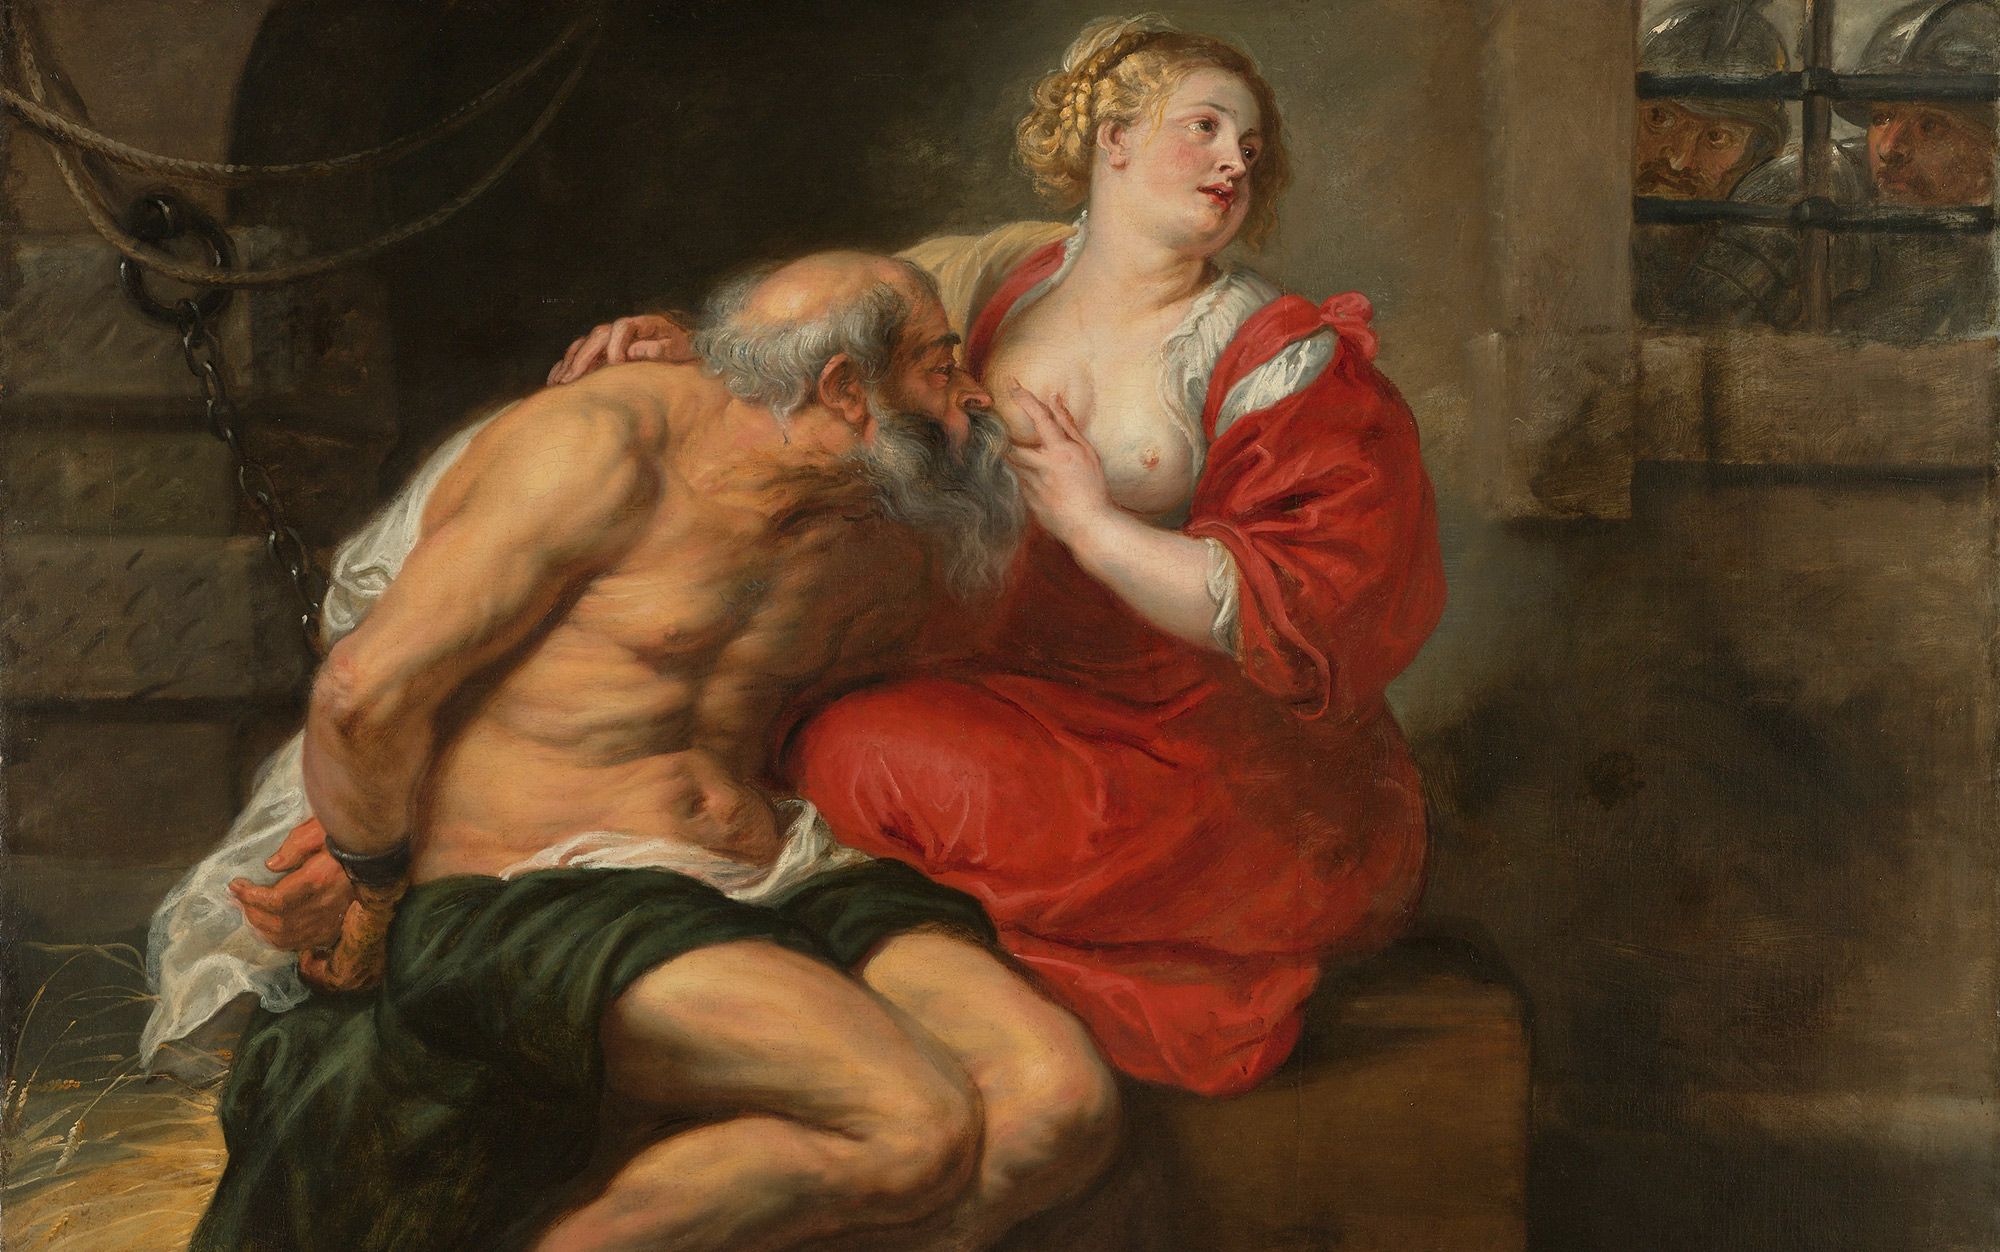 Breast Rape - On Roman Charity, or a woman's filial debt to the patriarchy | Aeon Essays